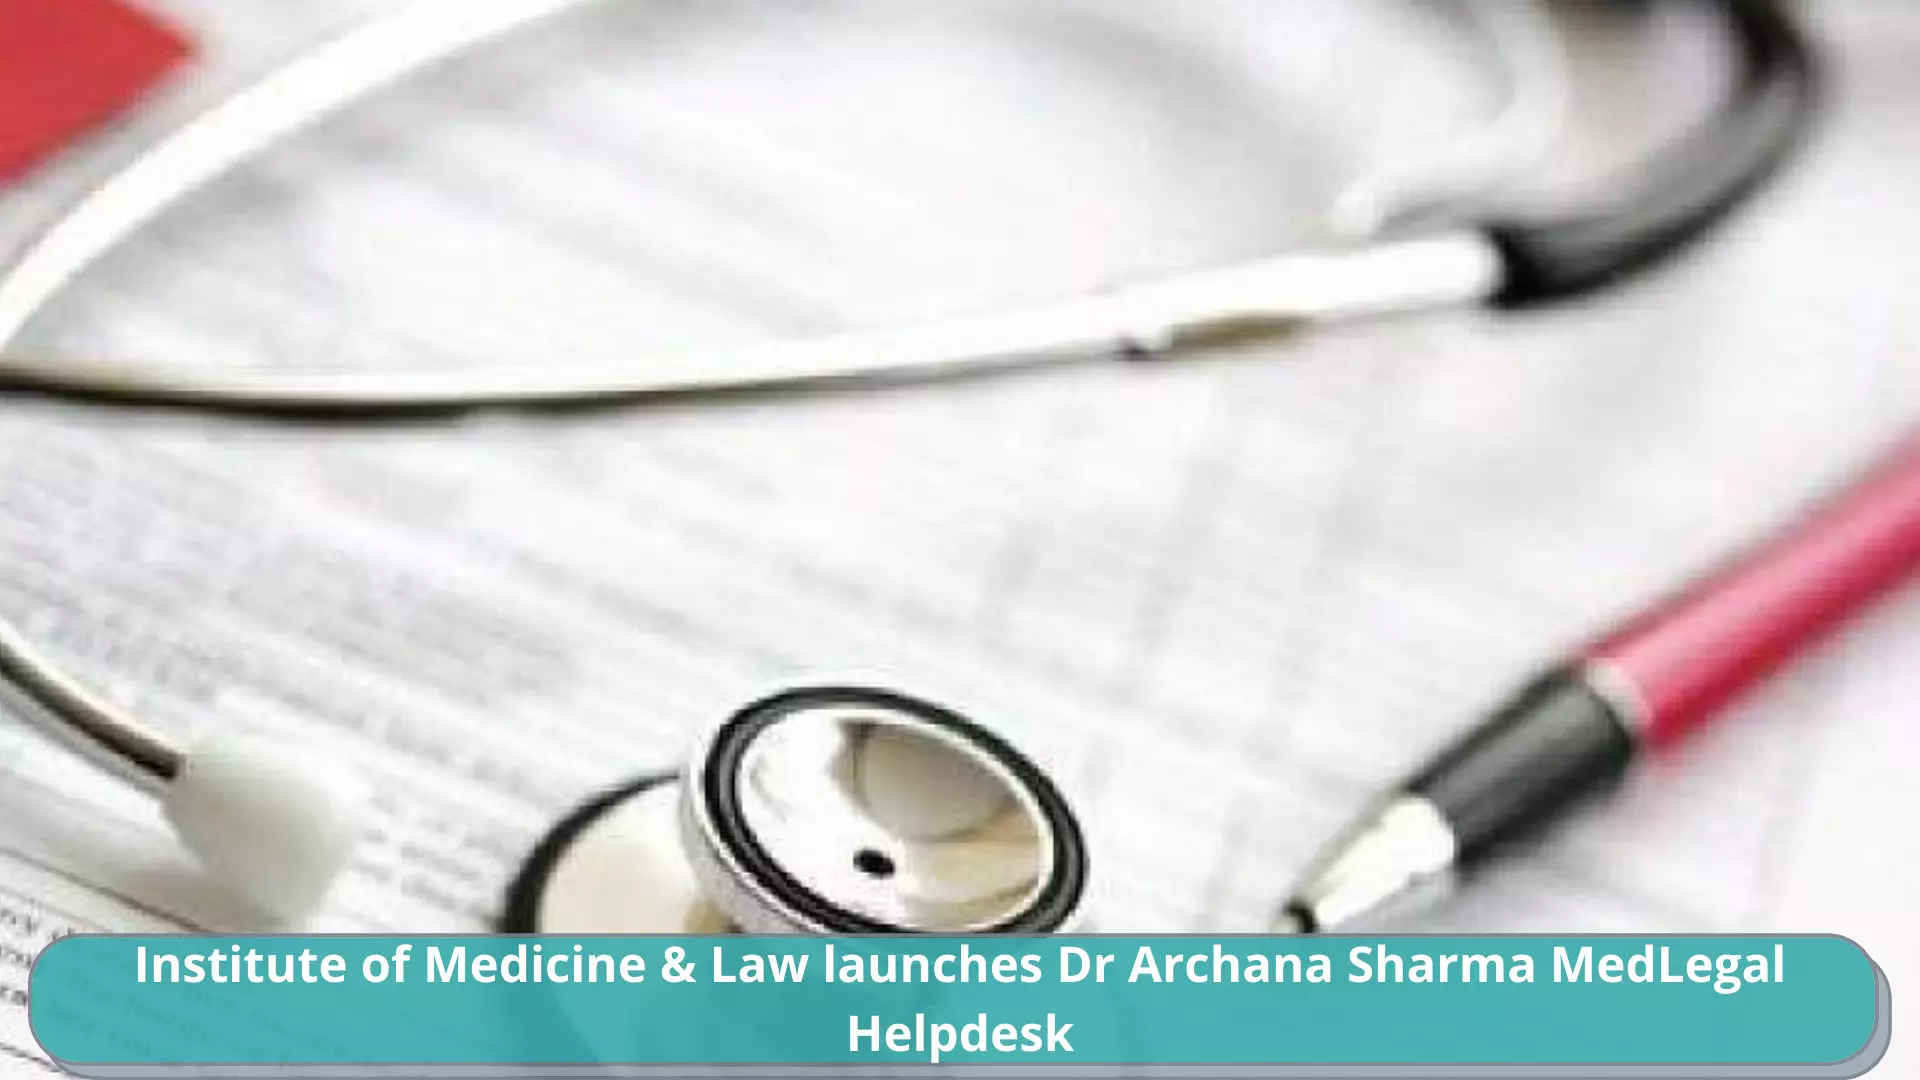 Institute of Medicine & Law launches Dr Archana Sharma MedLegal Helpdesk